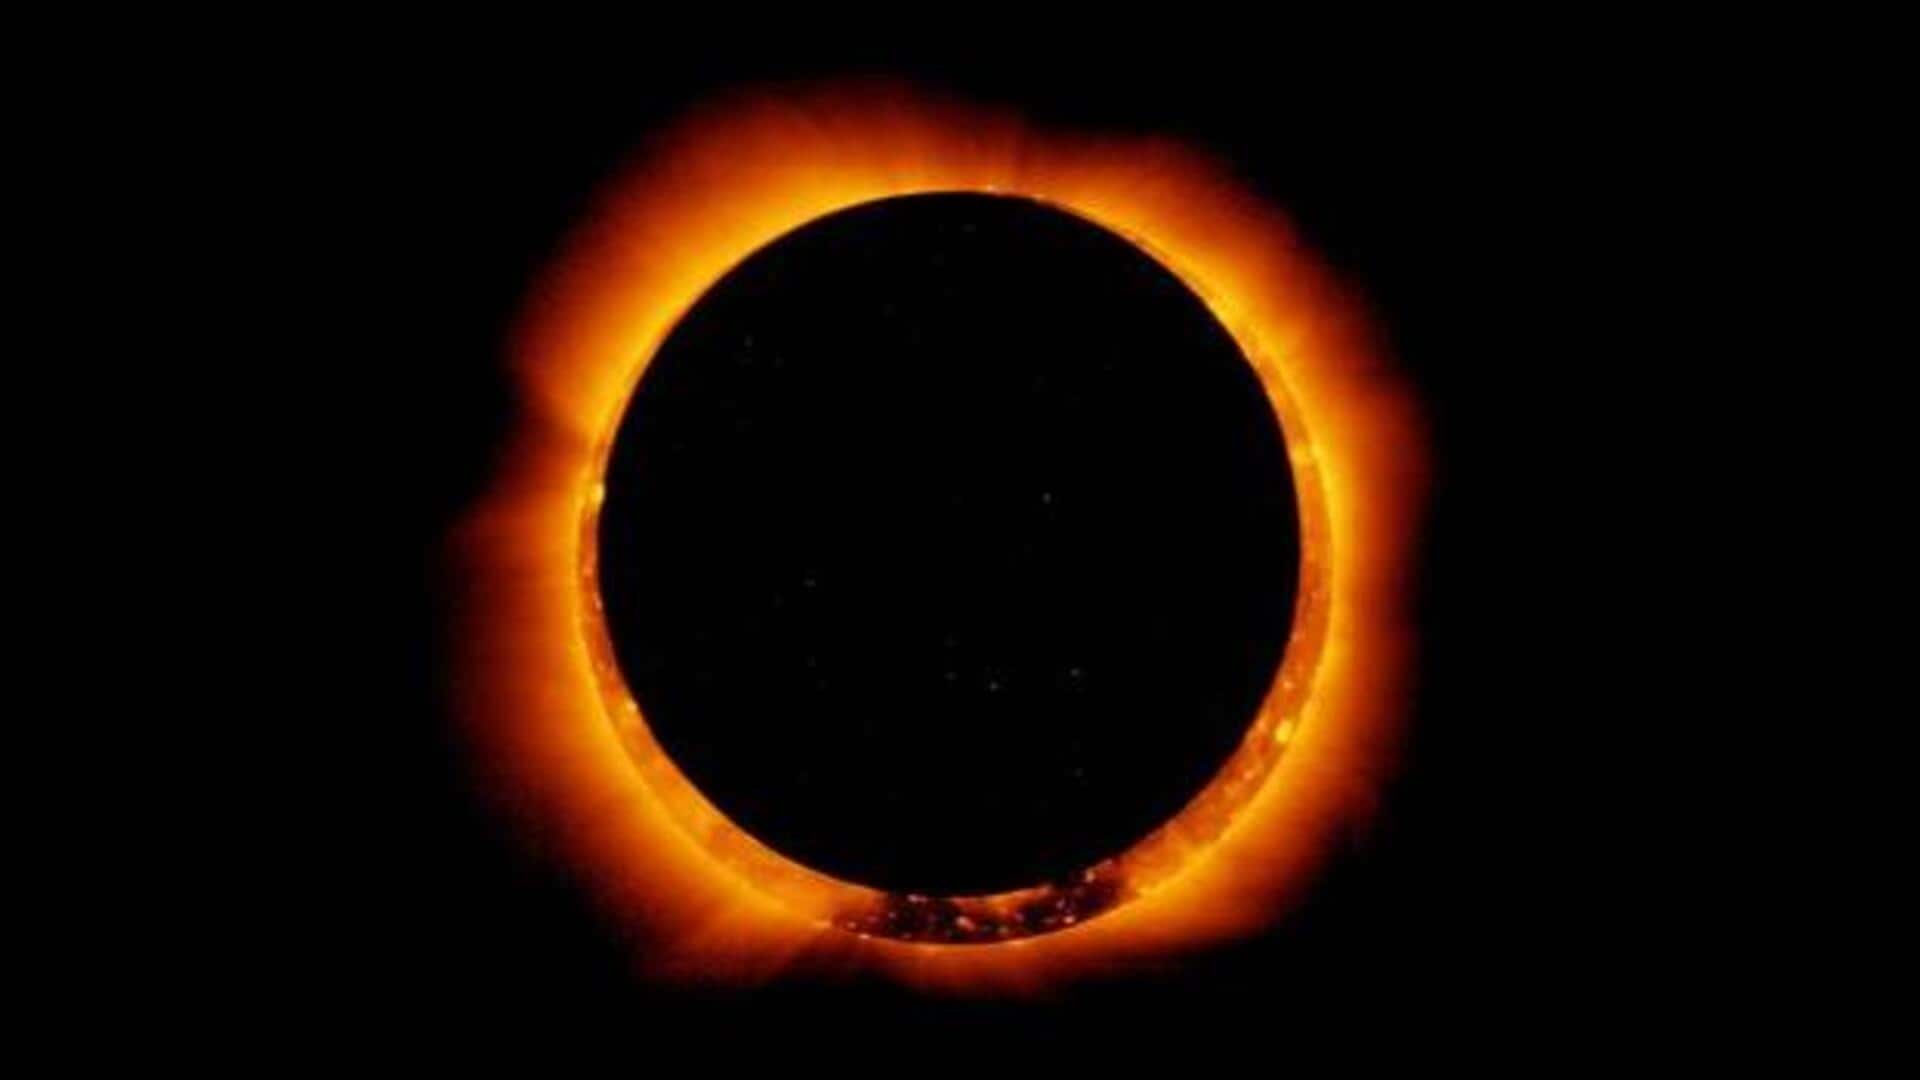 Spectacular 'ring of fire' solar eclipse happens on October 14